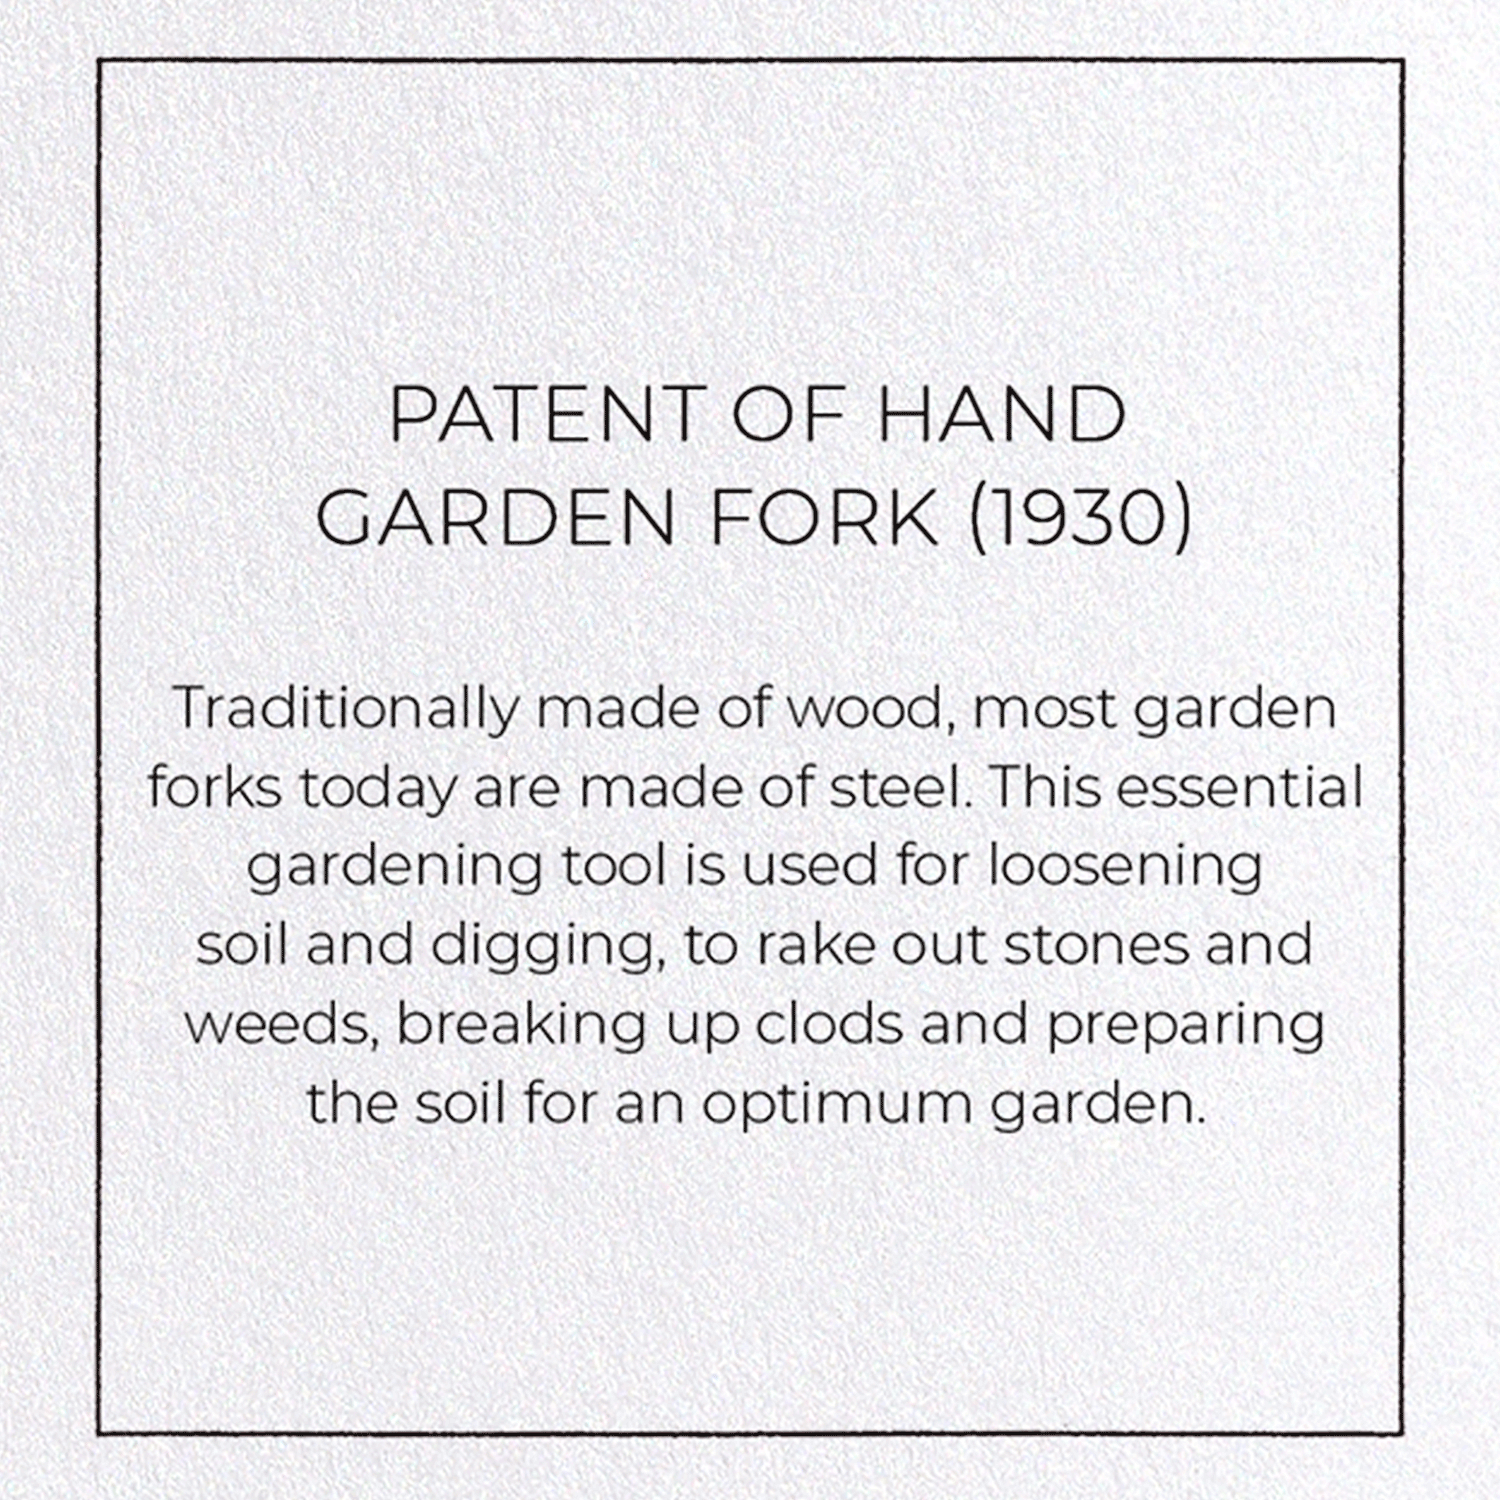 PATENT OF HAND GARDEN FORK (1930): Patent Greeting Card